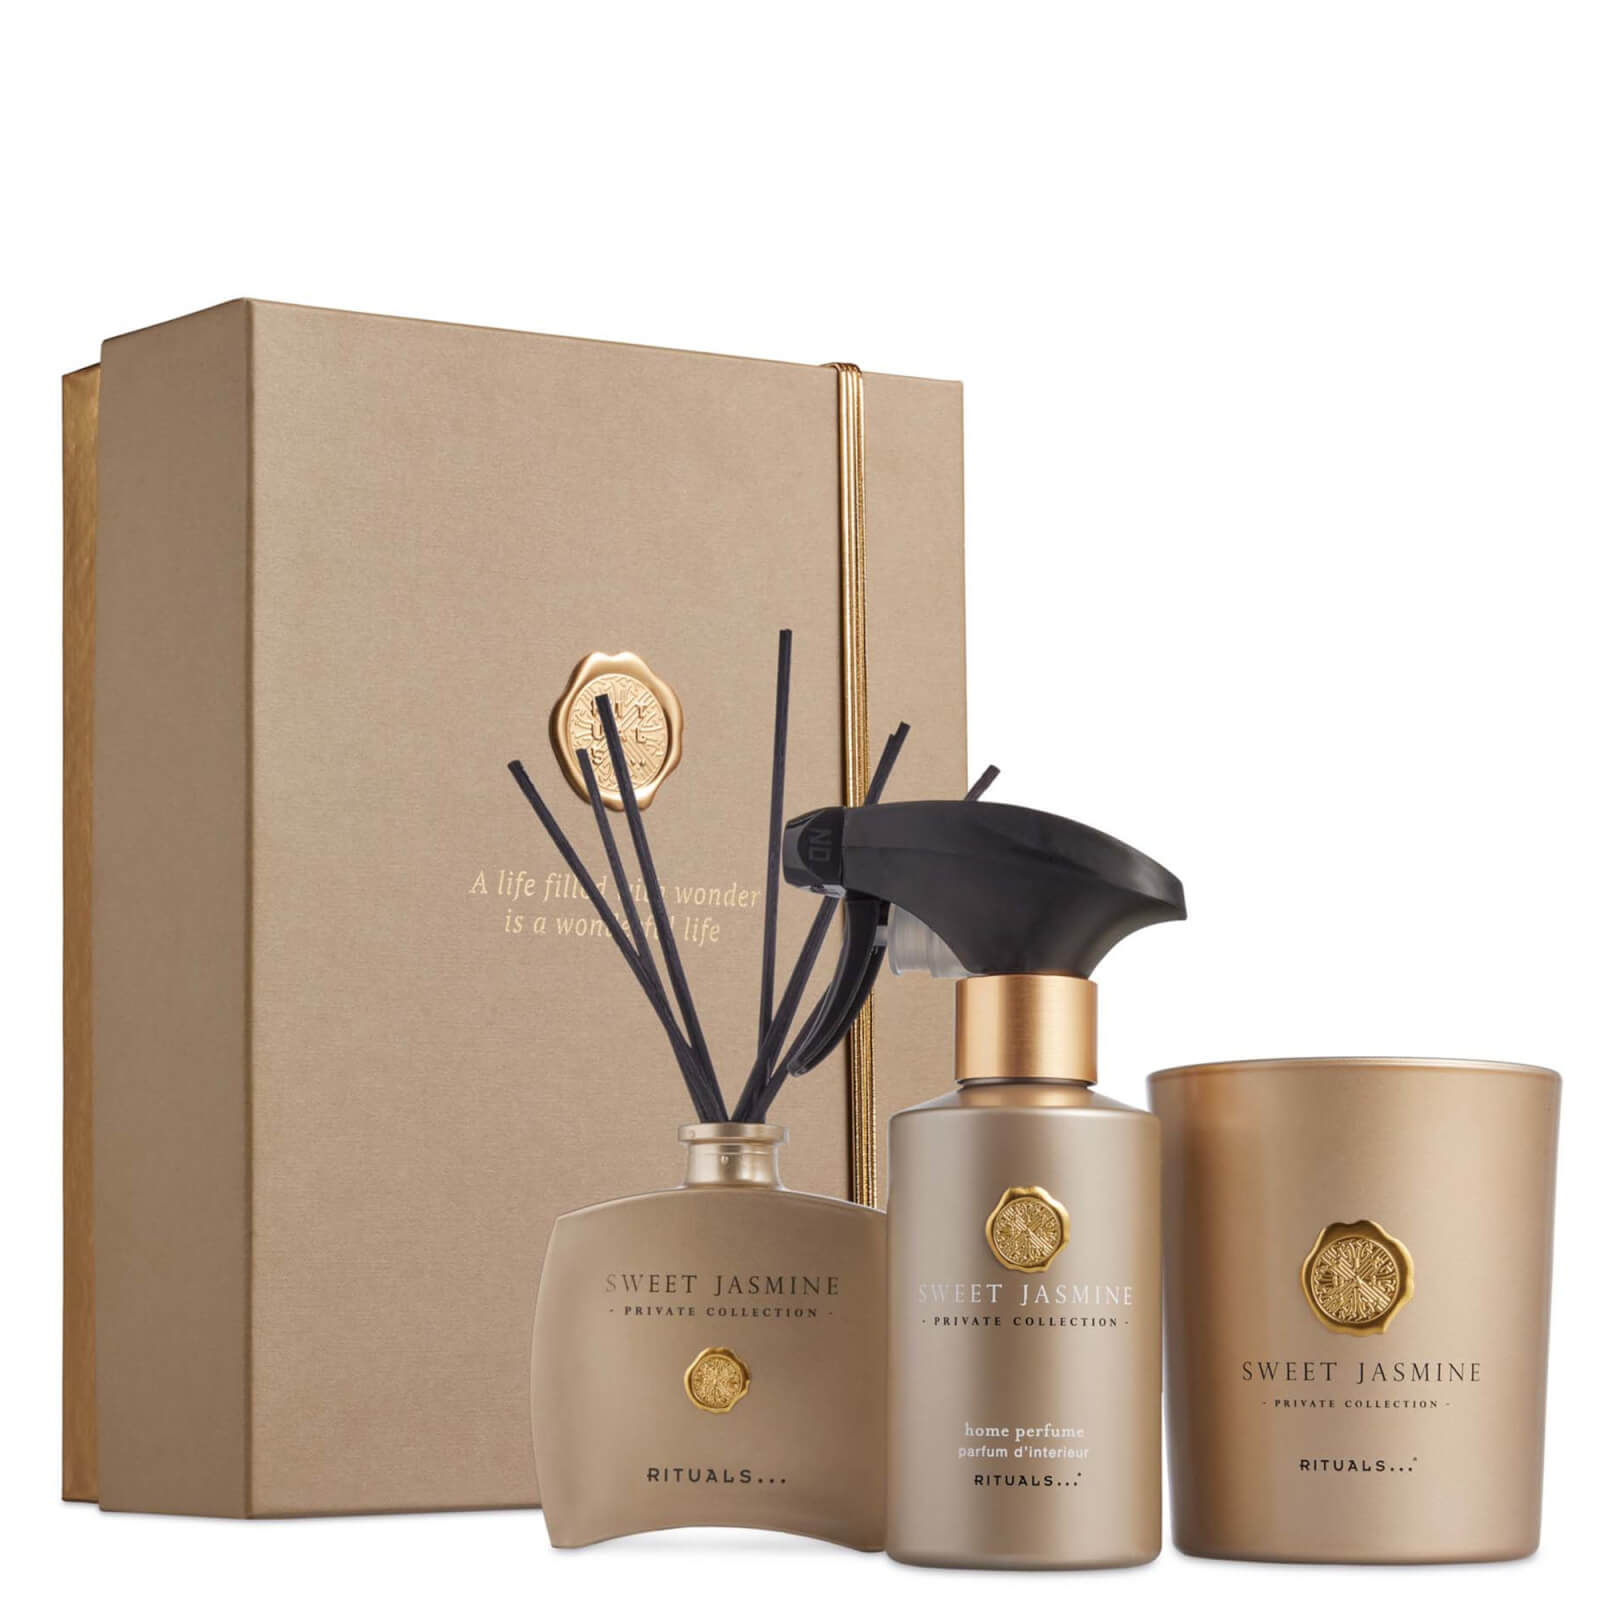 Rituals Private Collection Gift Set - Sweet Jasmine (Worth £87.30)